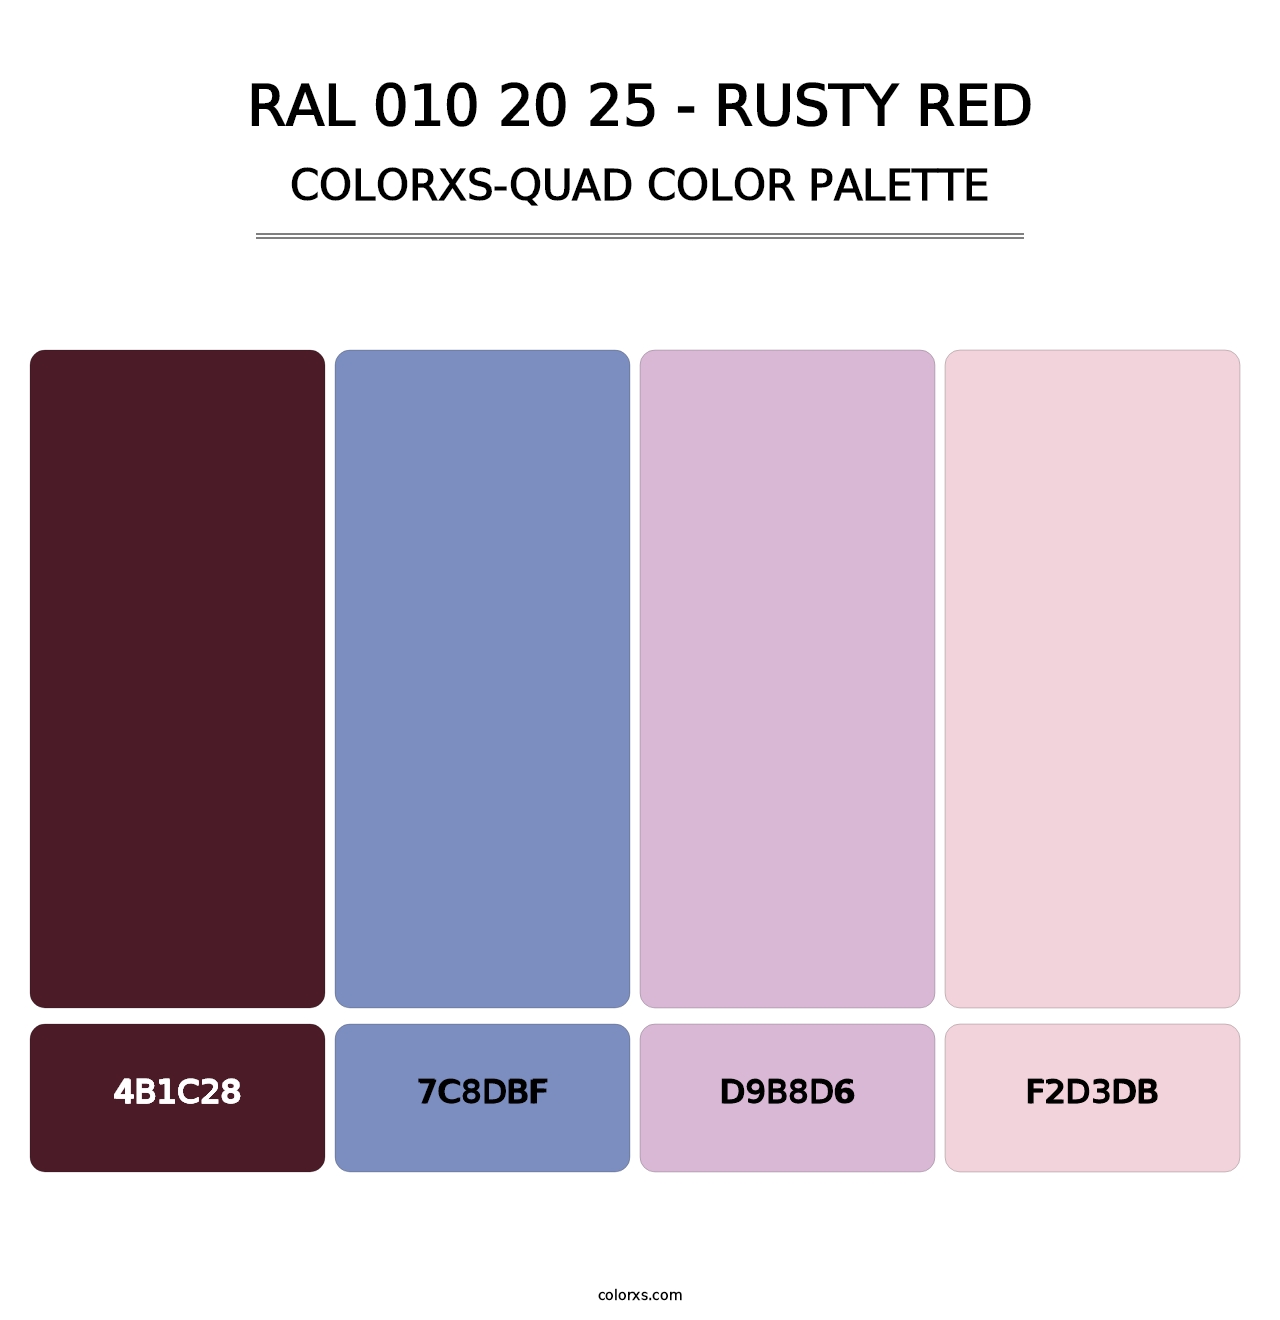 RAL 010 20 25 - Rusty Red - Colorxs Quad Palette